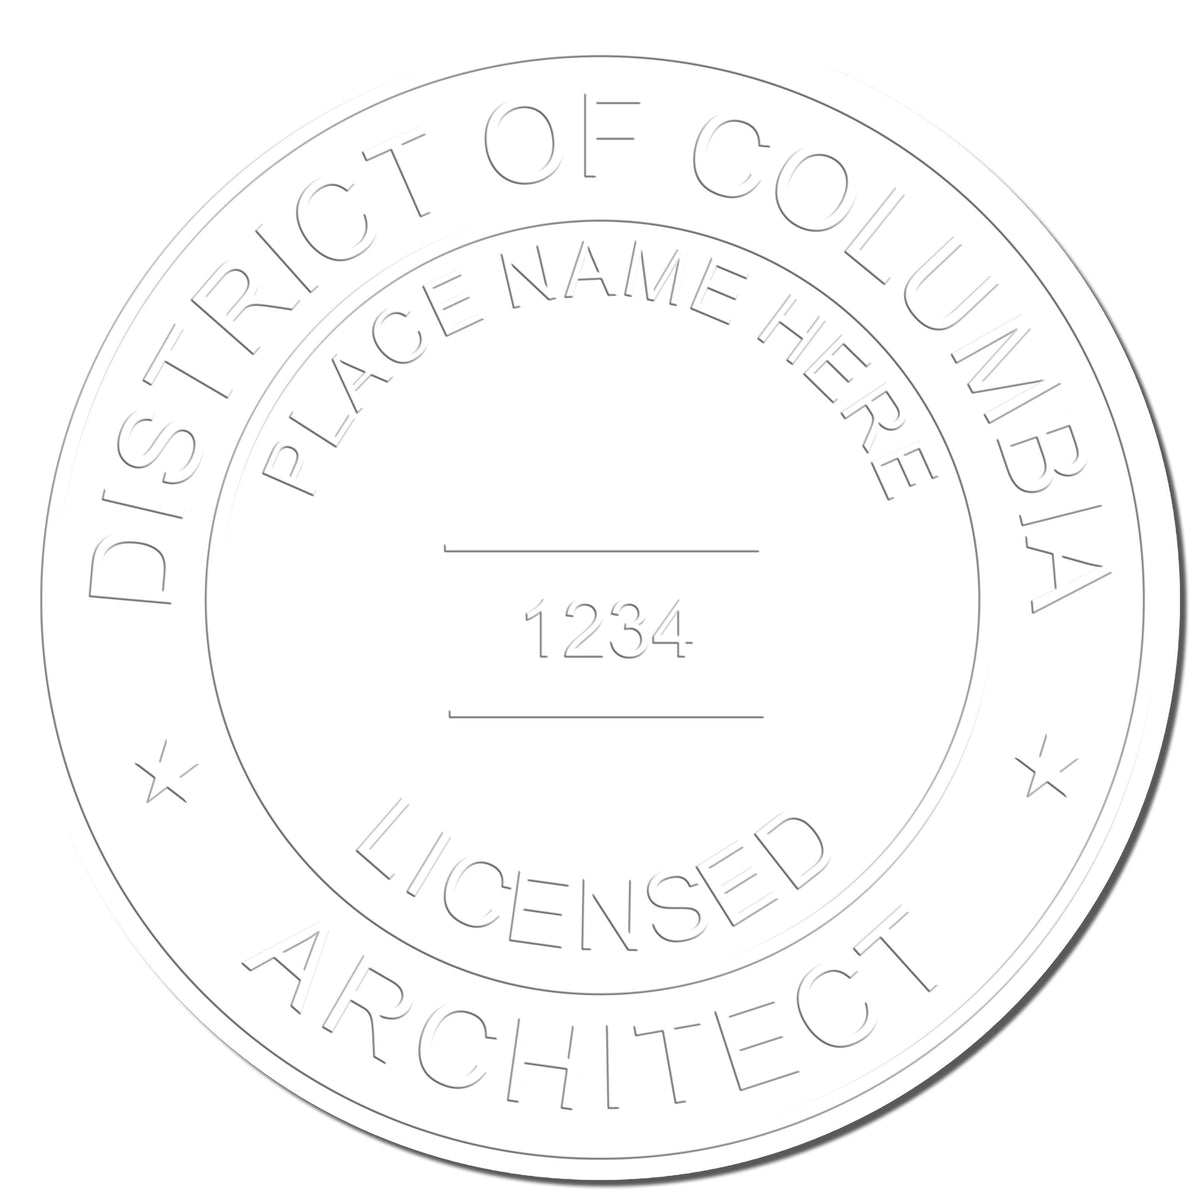 This paper is stamped with a sample imprint of the Hybrid District of Columbia Architect Seal, signifying its quality and reliability.